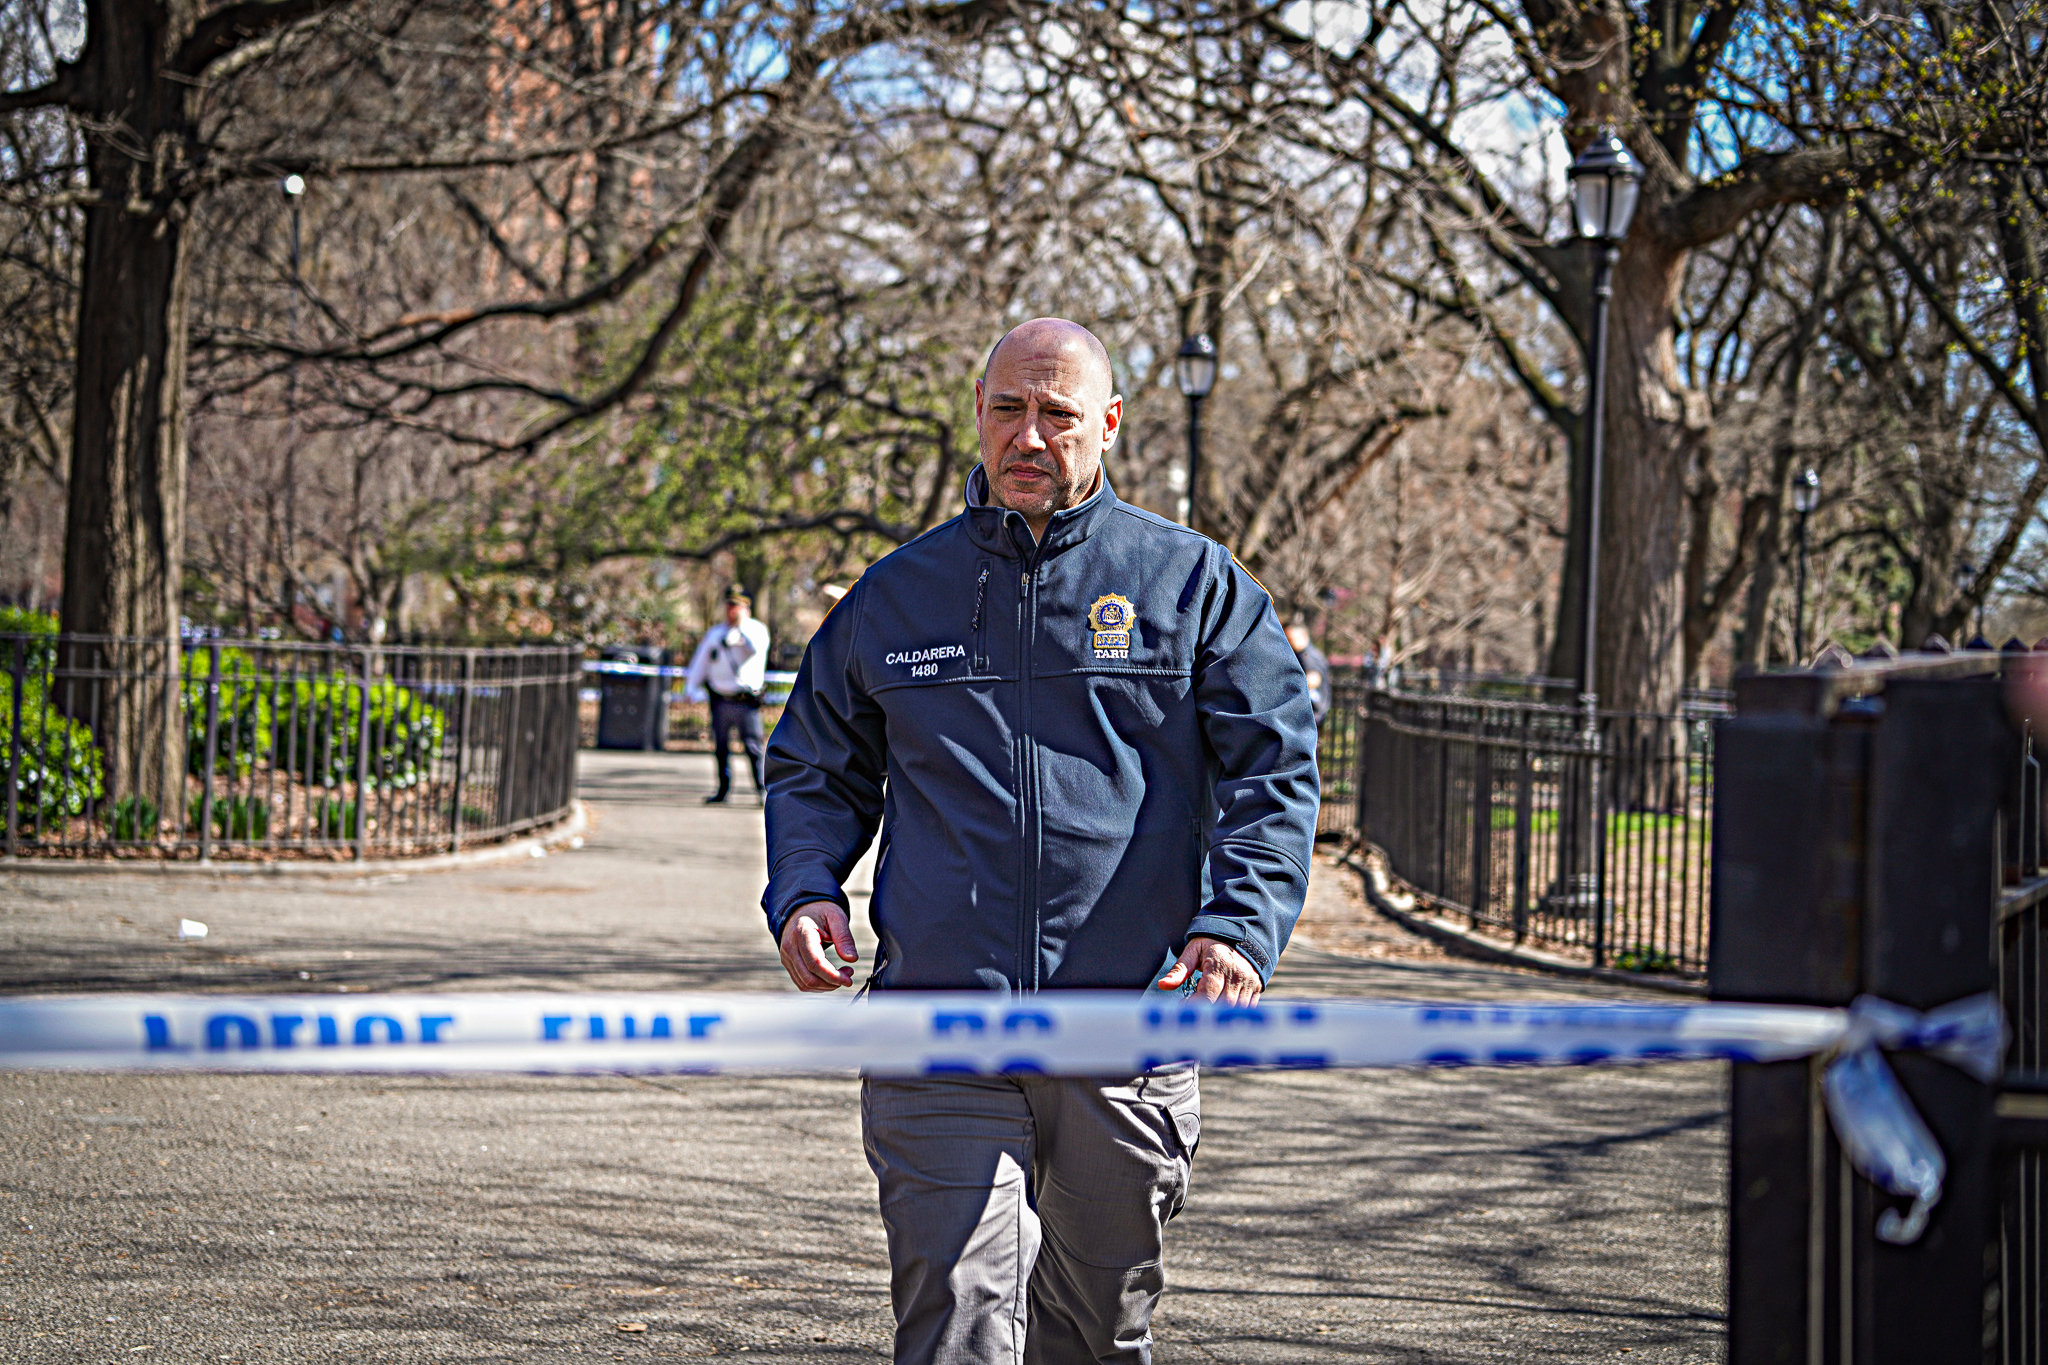 Two people enjoying the warm weather in Tompkins Square Park on Saturday were shot after being caught in the crossfire when bullets rang out, police and eyewitnesses said.